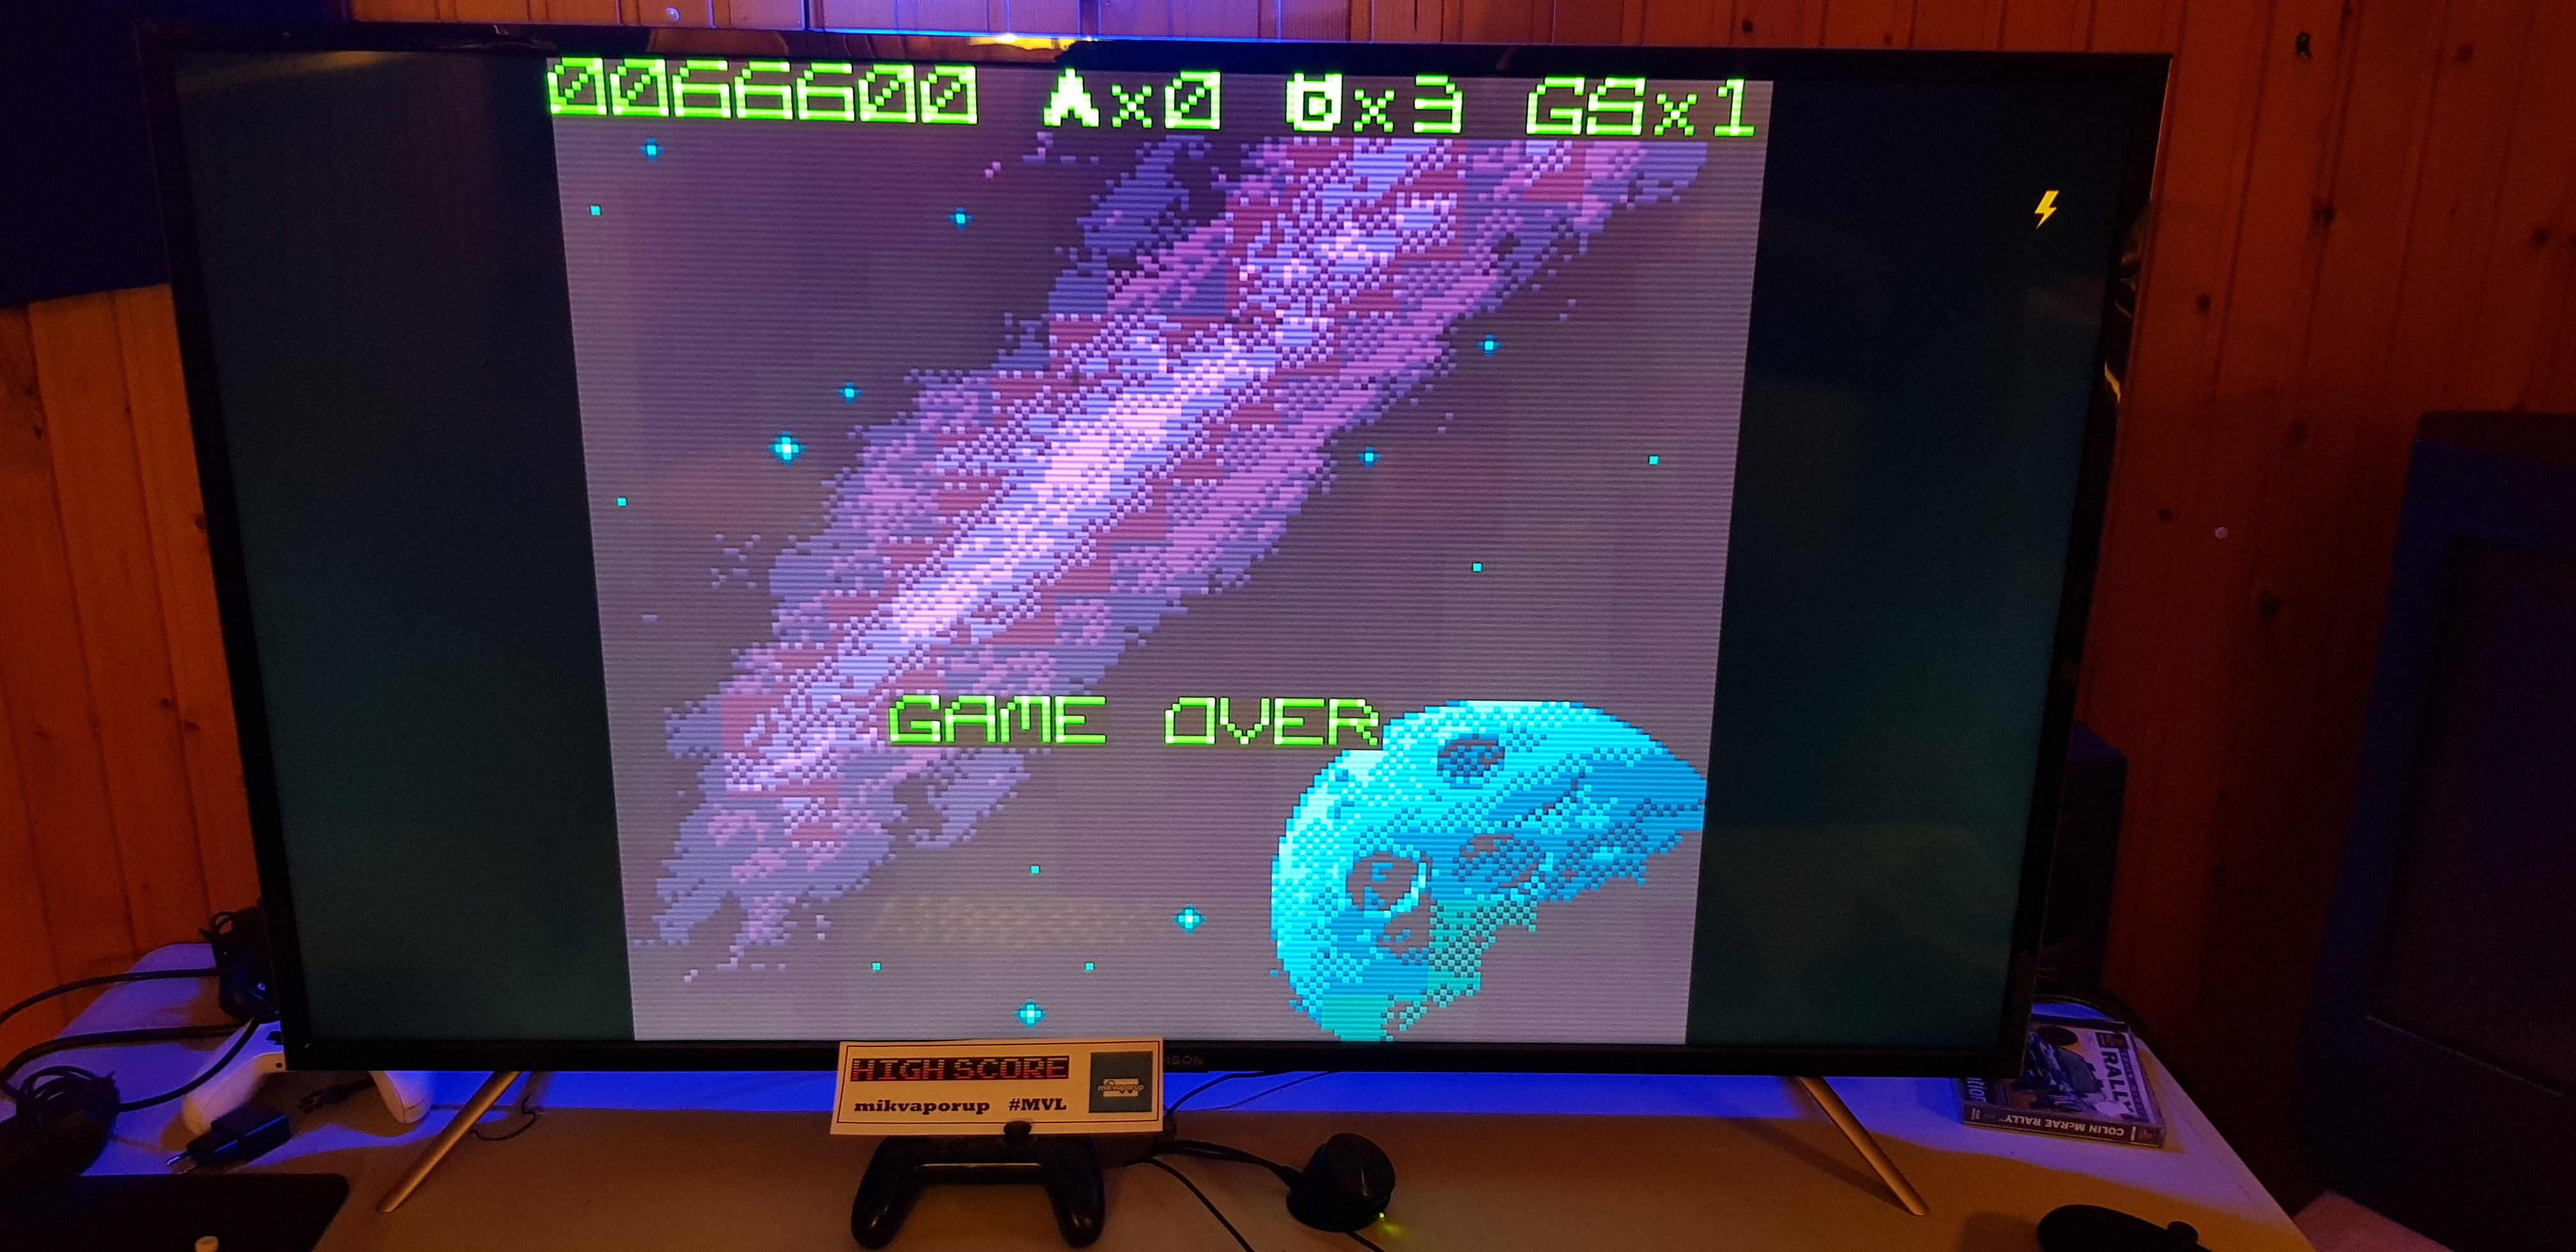 mikvaporup: Asteroids (Game Boy Color Emulated) 66,600 points on 2019-11-01 18:20:17